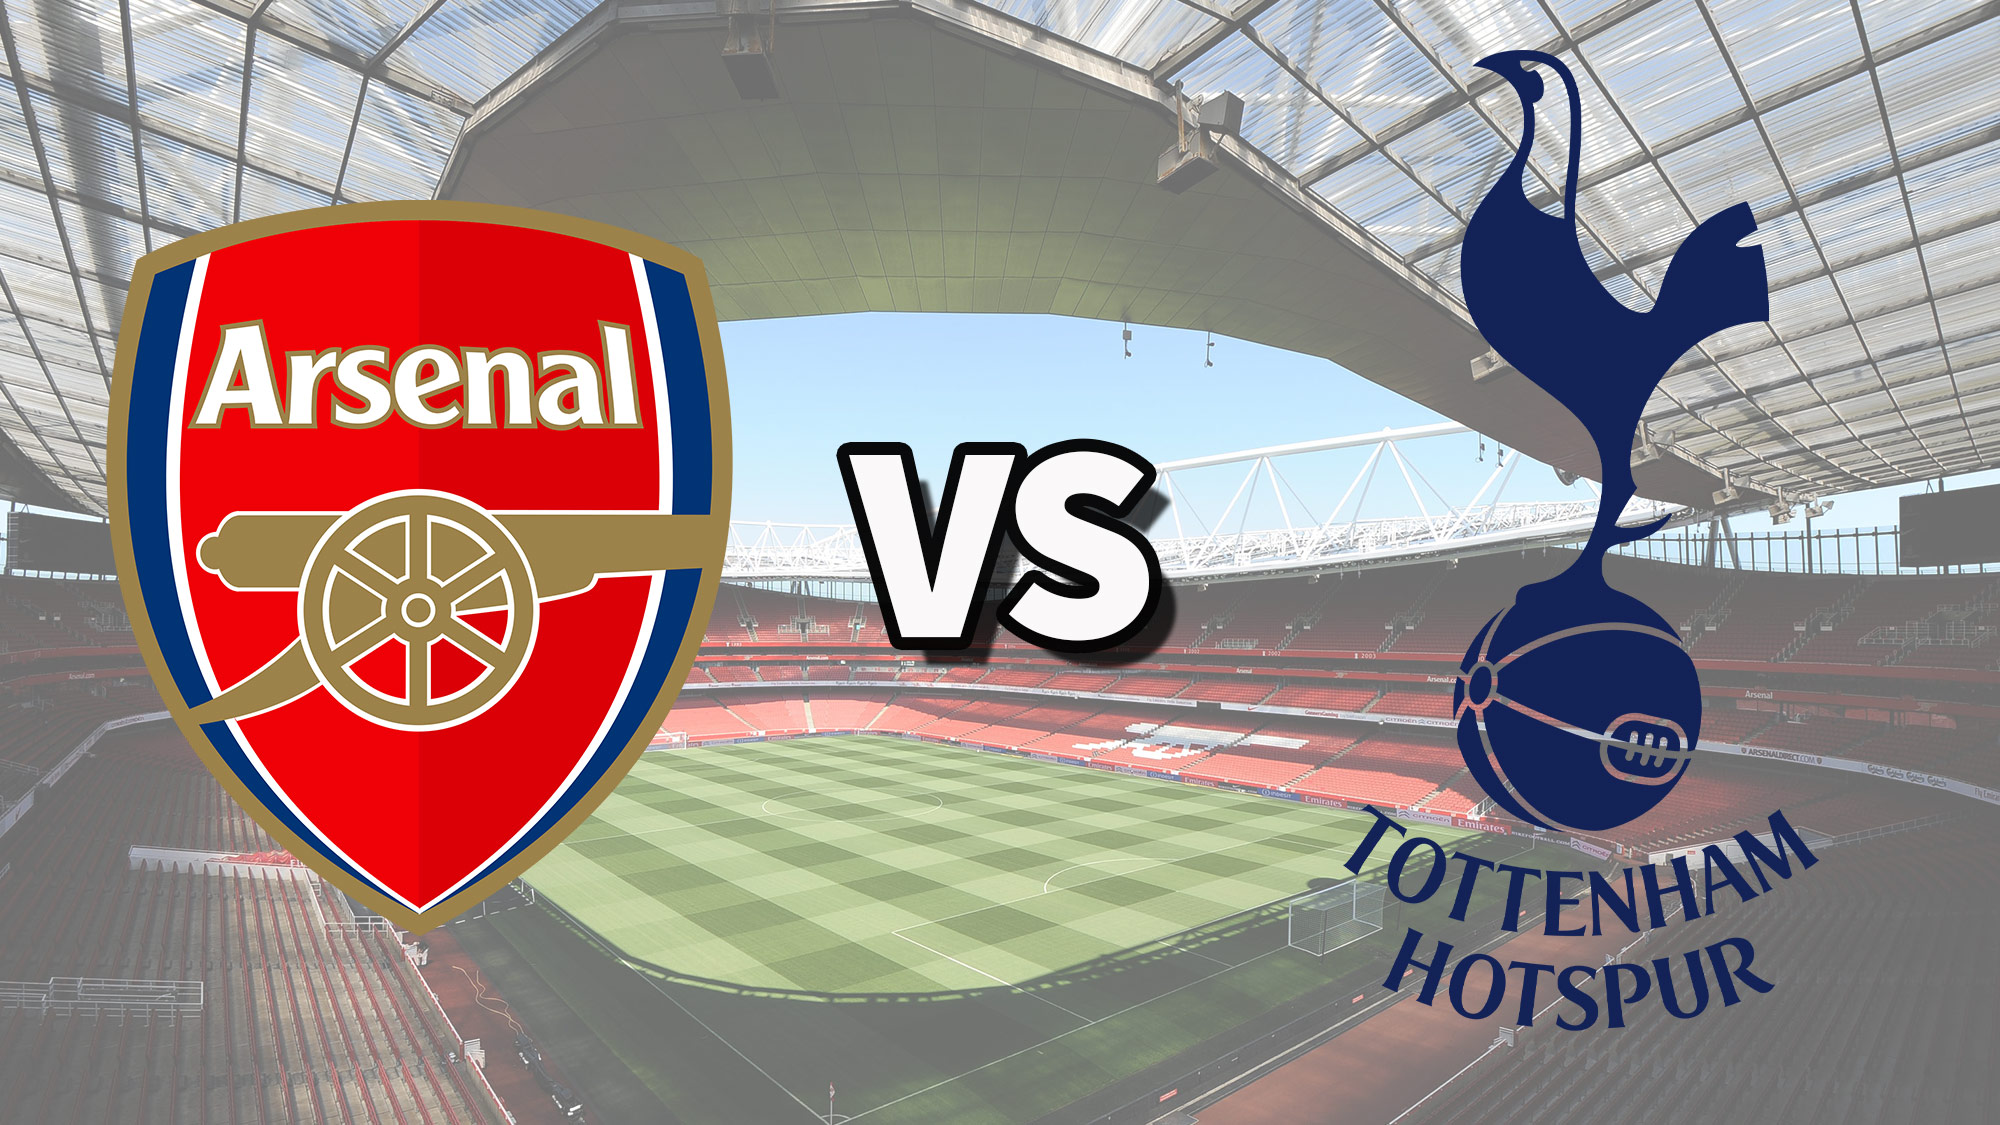 Arsenal vs Tottenham live stream and how to watch Premier League game